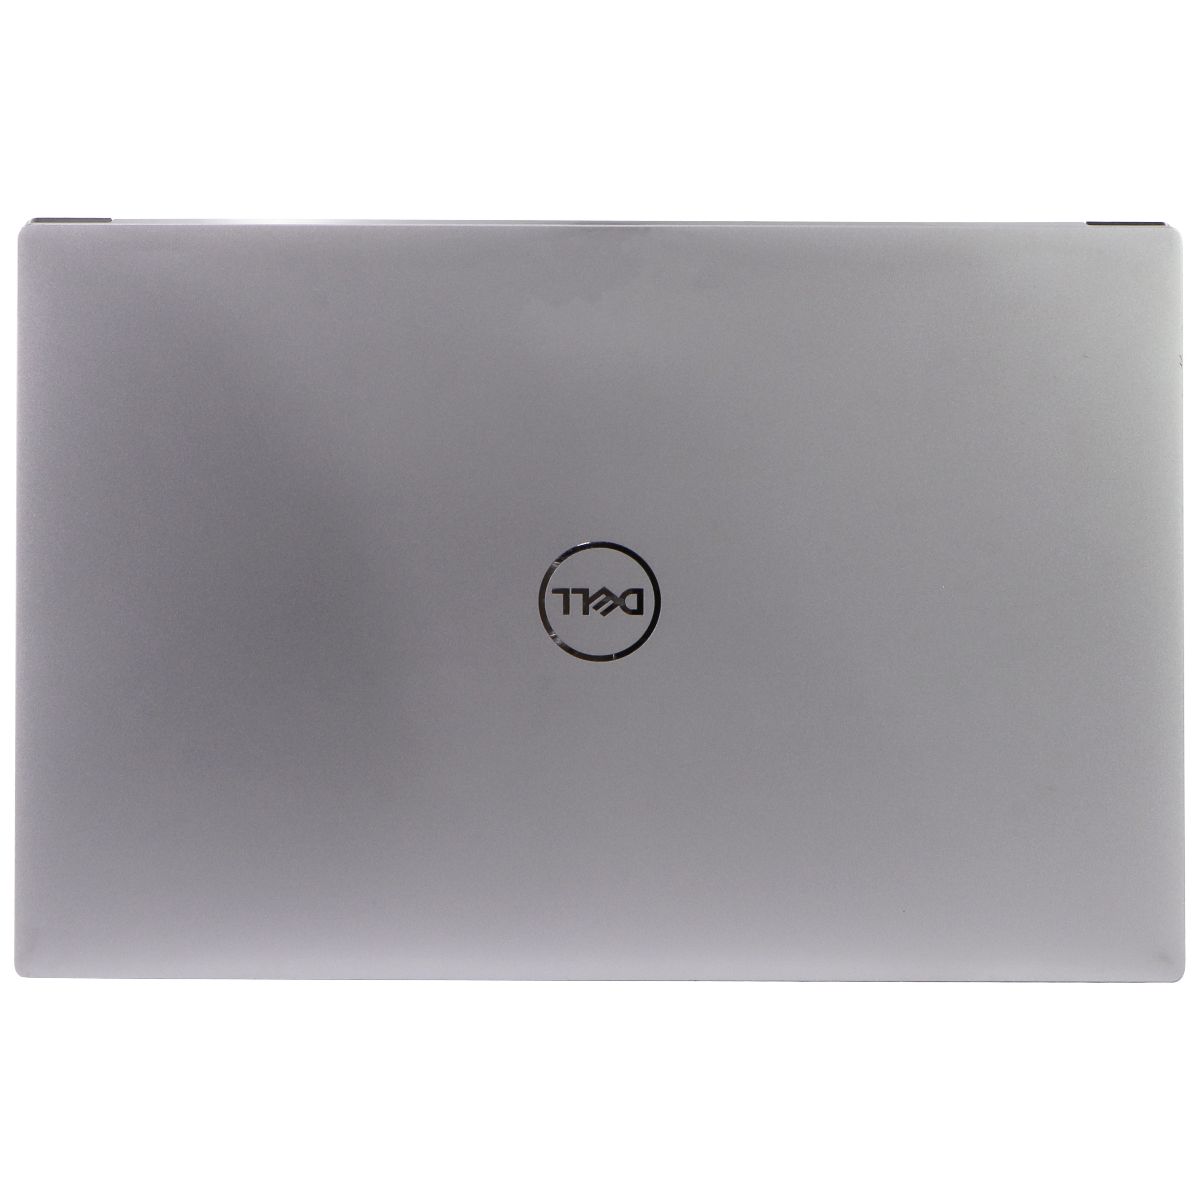 Dell XPS 15 9500 - (15.6) Intel Core i7-10750H/GeForce GTX 1650 - 512GB SSD/16GB Laptops - PC Laptops & Netbooks Dell    - Simple Cell Bulk Wholesale Pricing - USA Seller